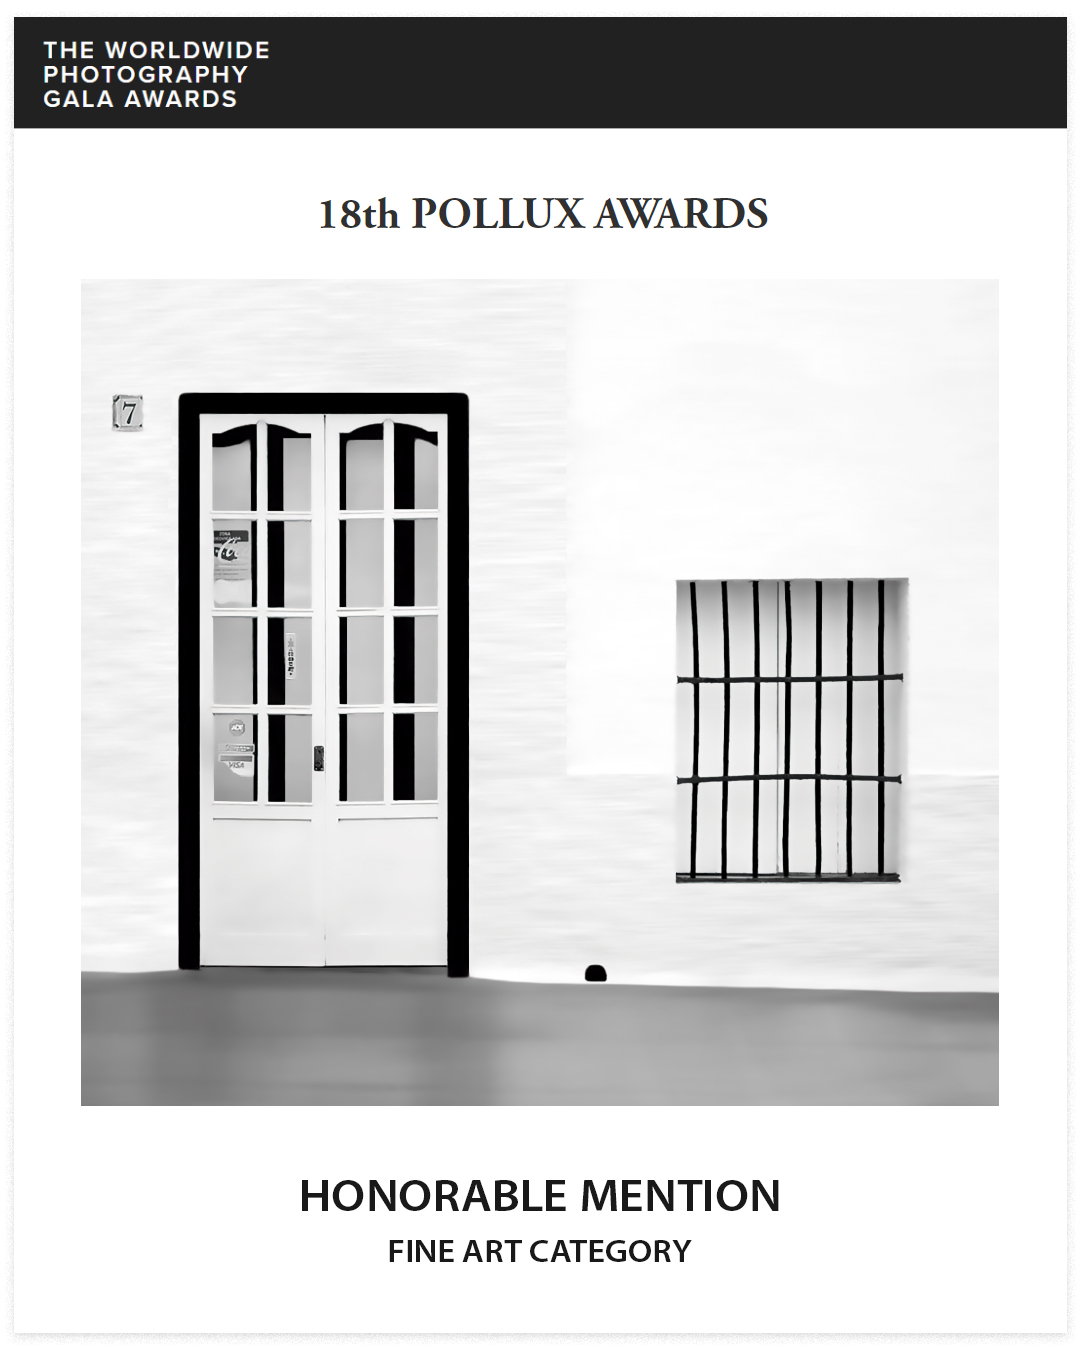 Confinement, Honorable Mention in Fine Art Category